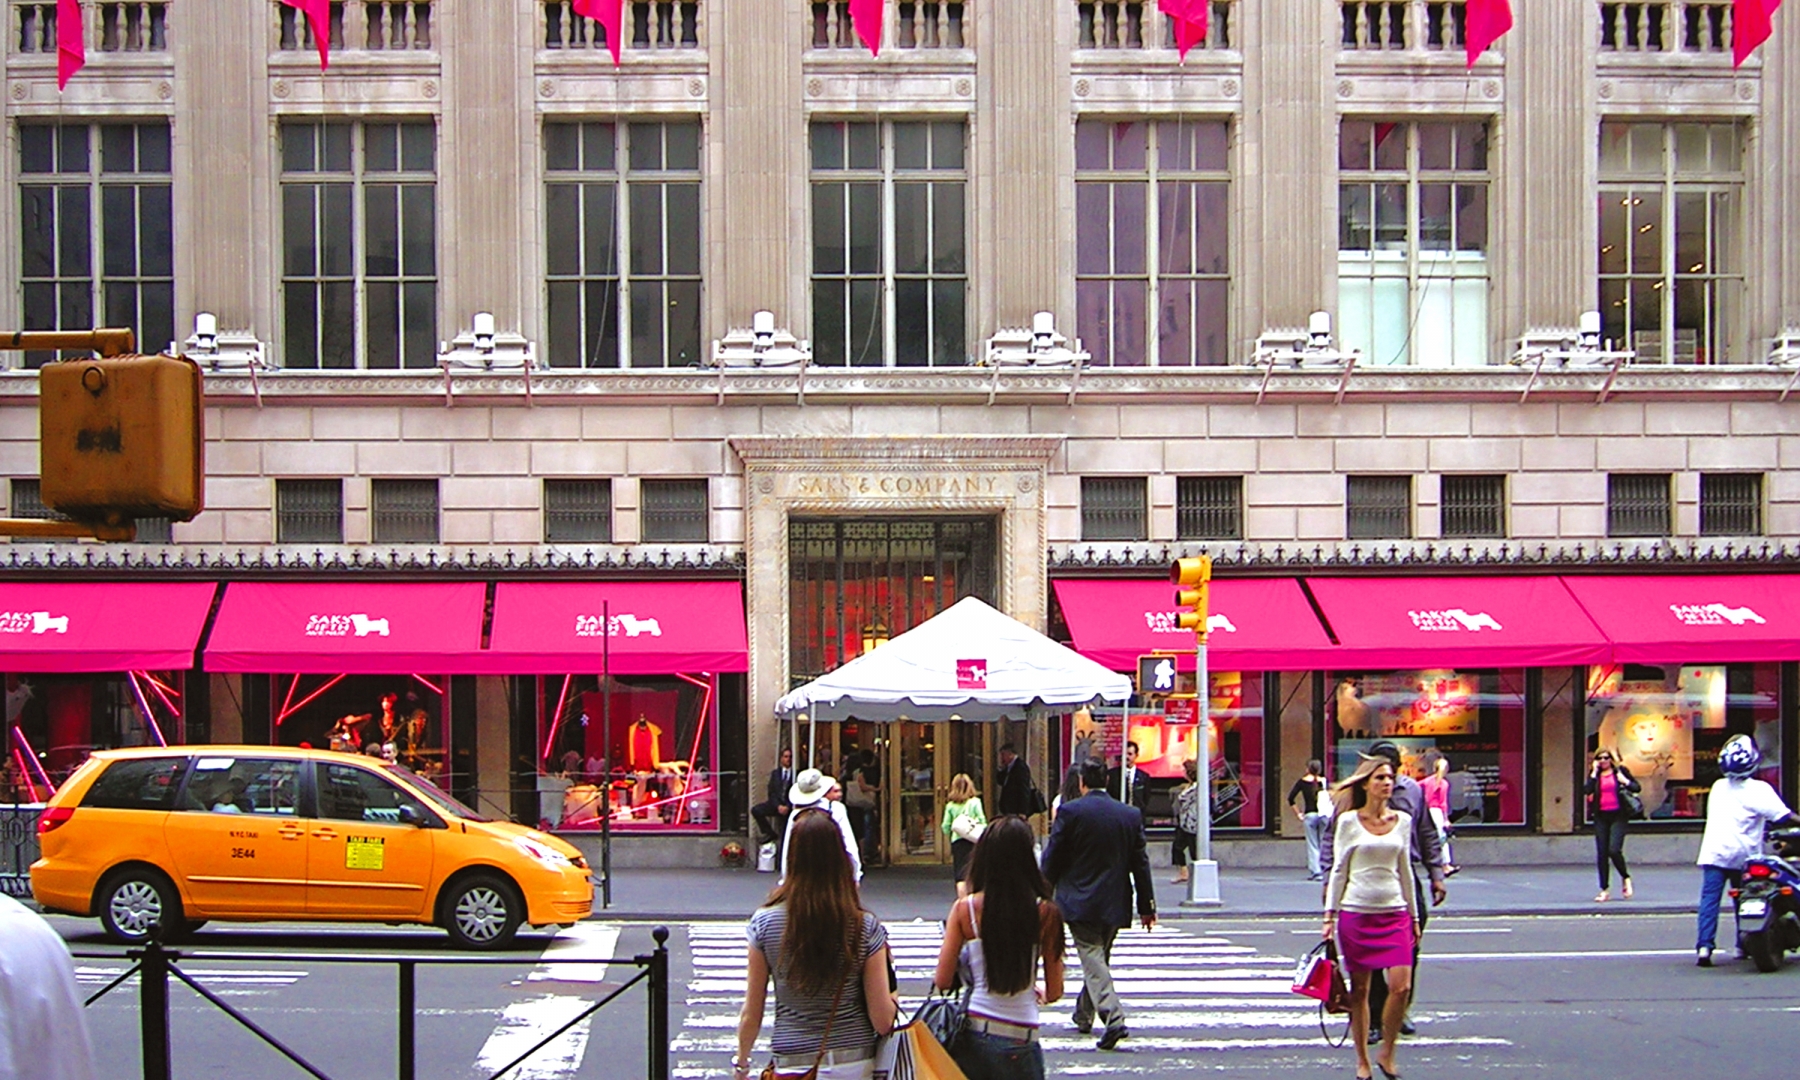 Saks Fifth Avenue attempts to regain wealthy customers